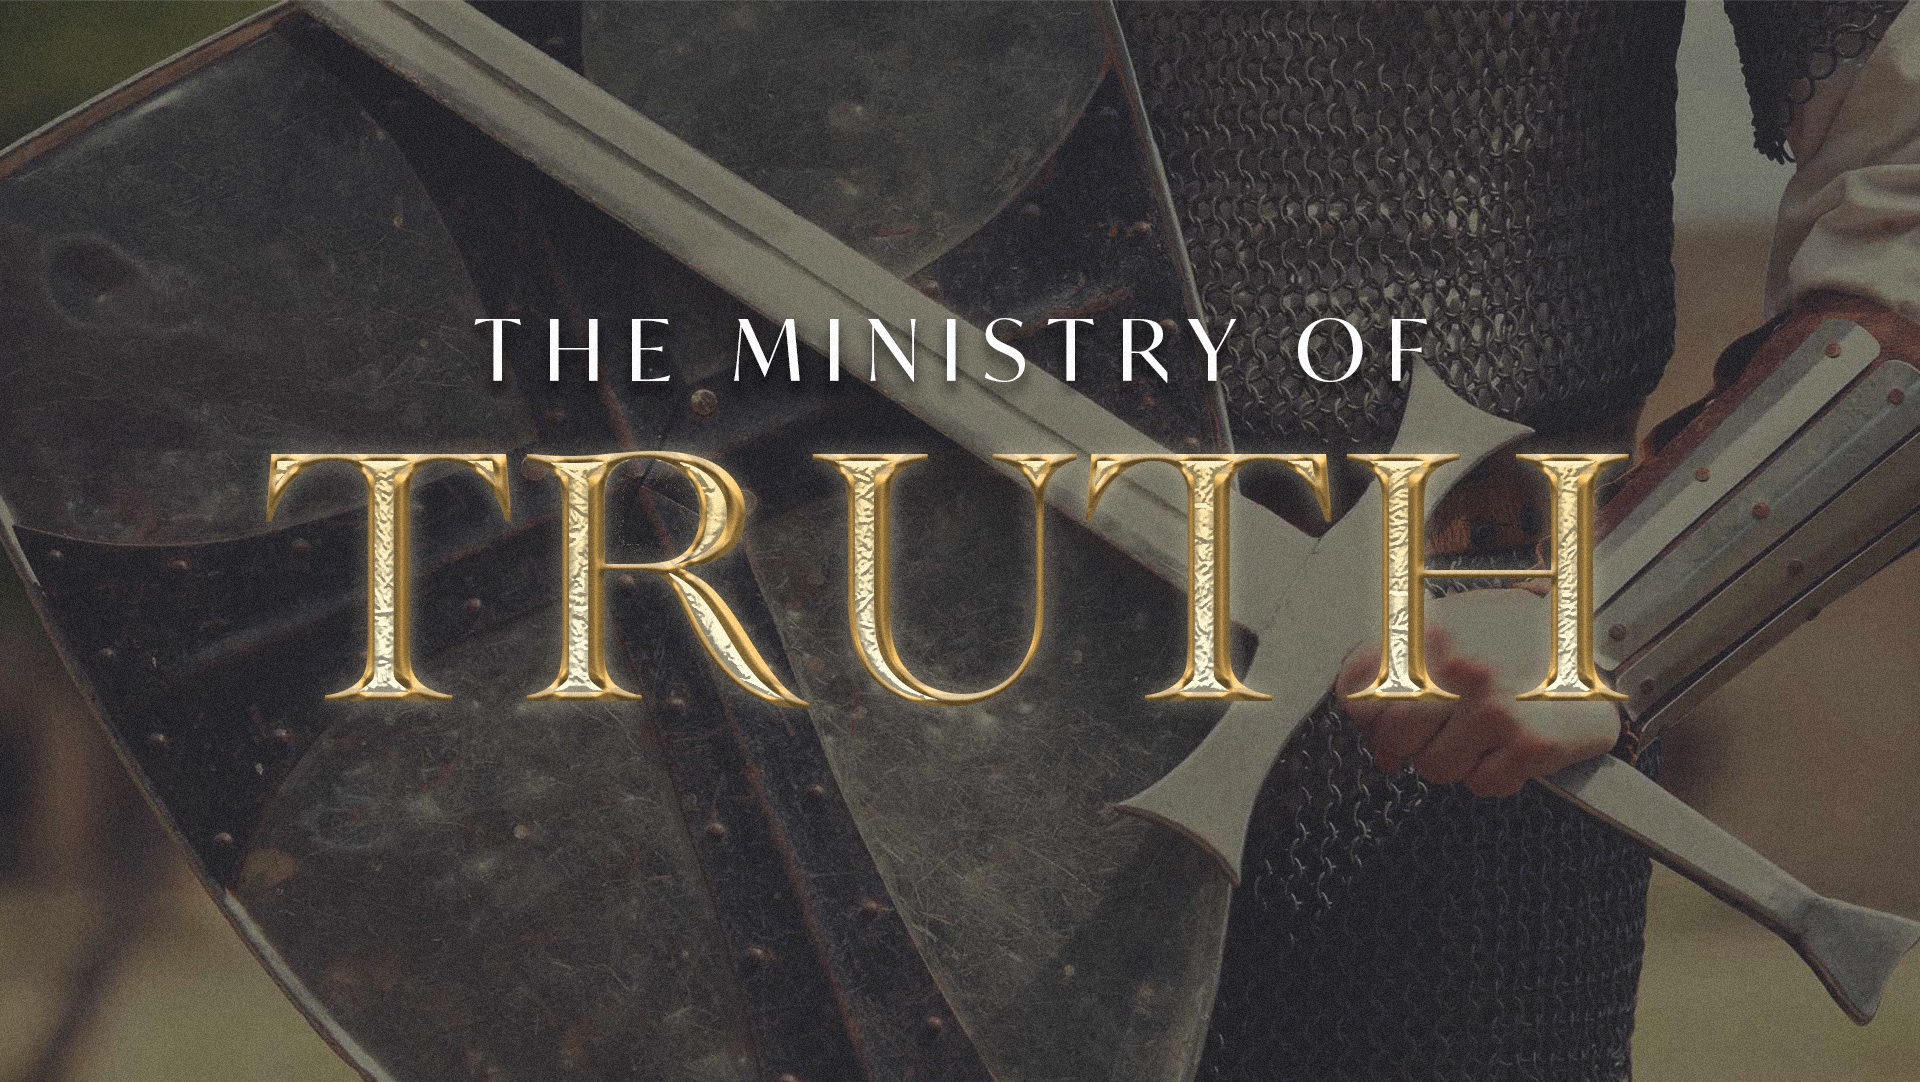 The Ministry of Truth